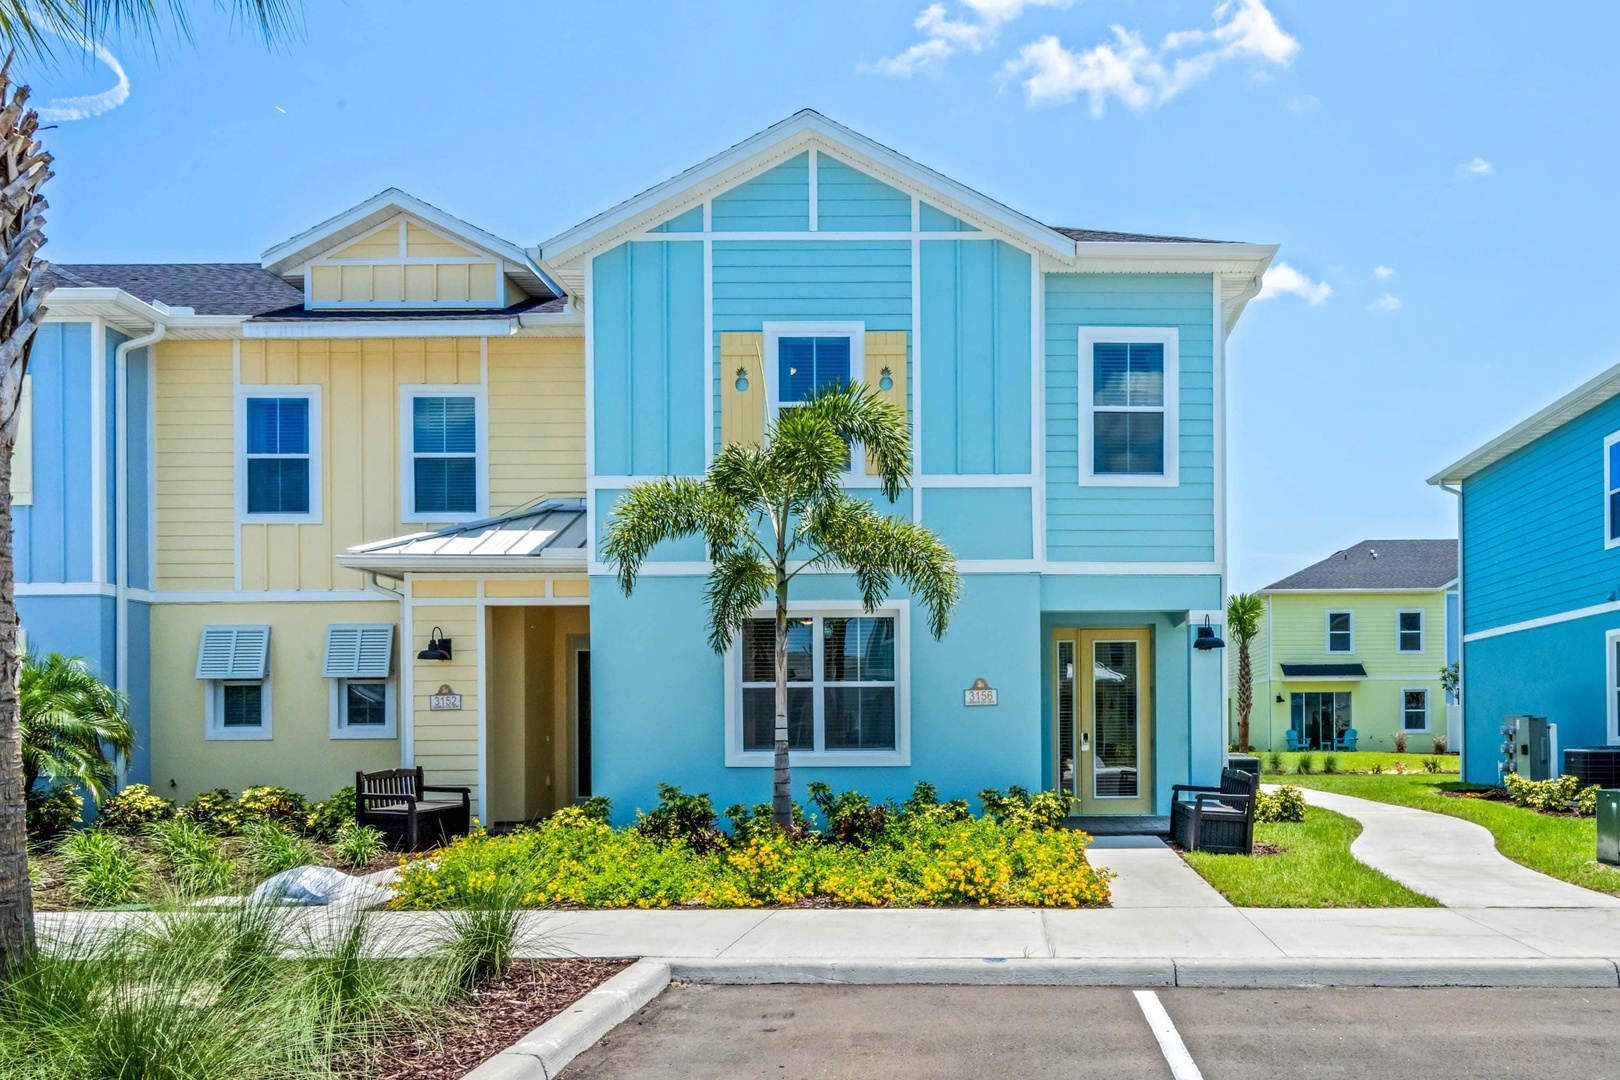 Welcome to the bright and cheerful blue exterior of this end unit townhome!